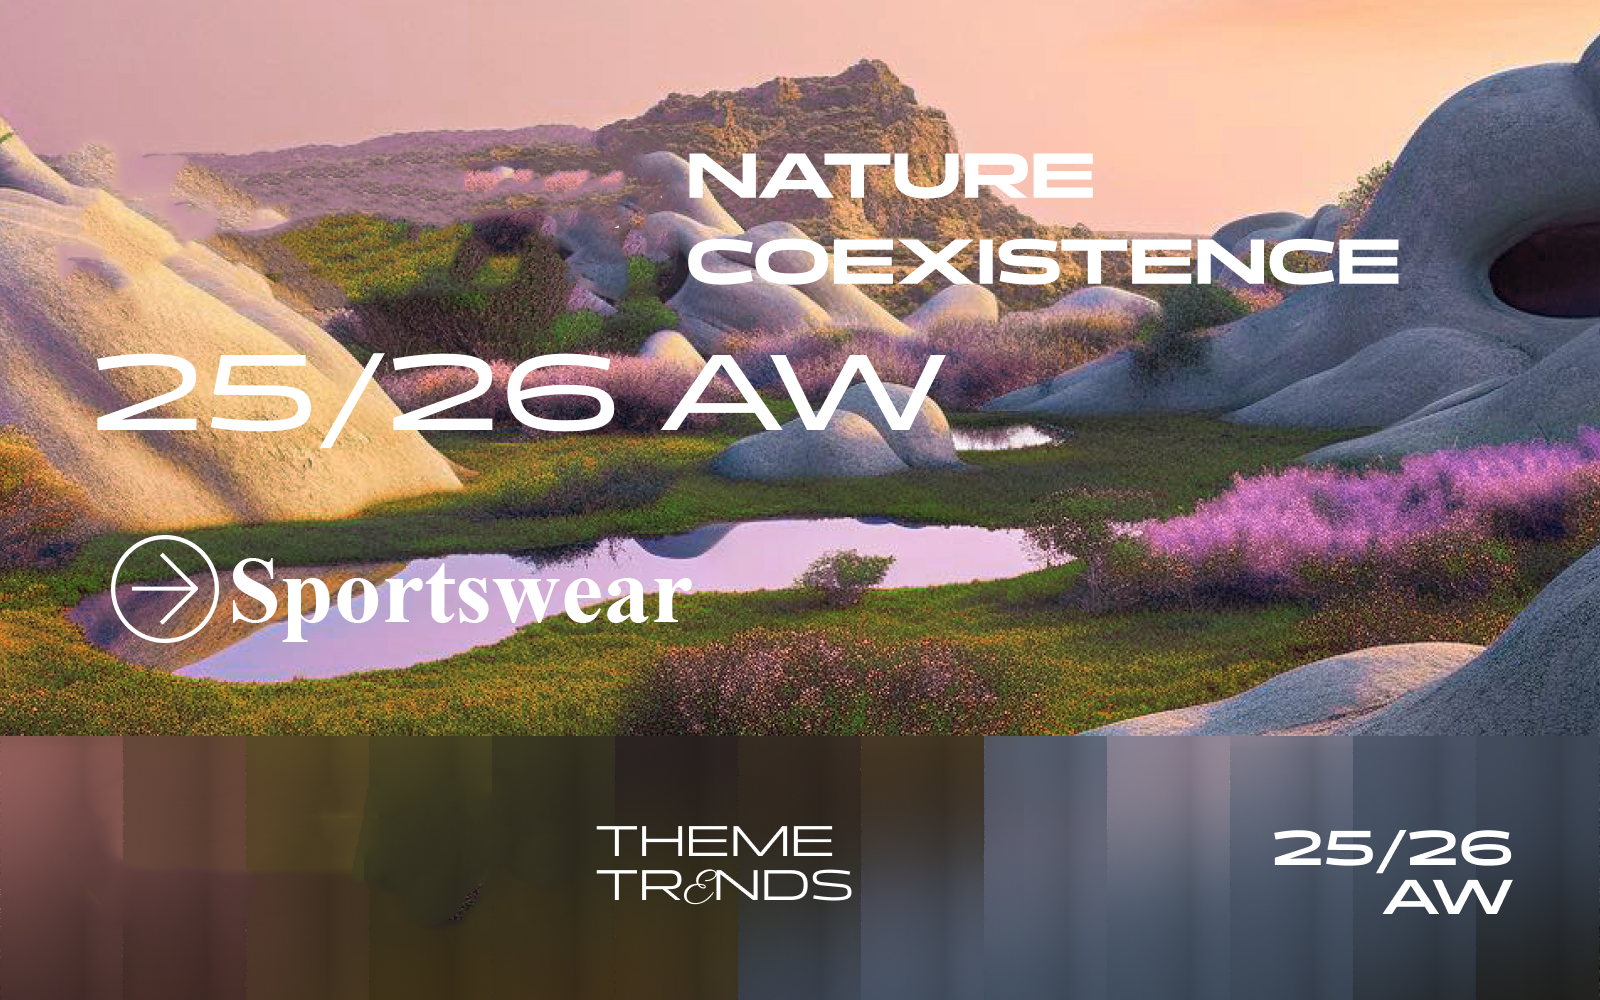 Natural Coexistence -- A/W 25/26 Thematic Trend for Outdoor Sports